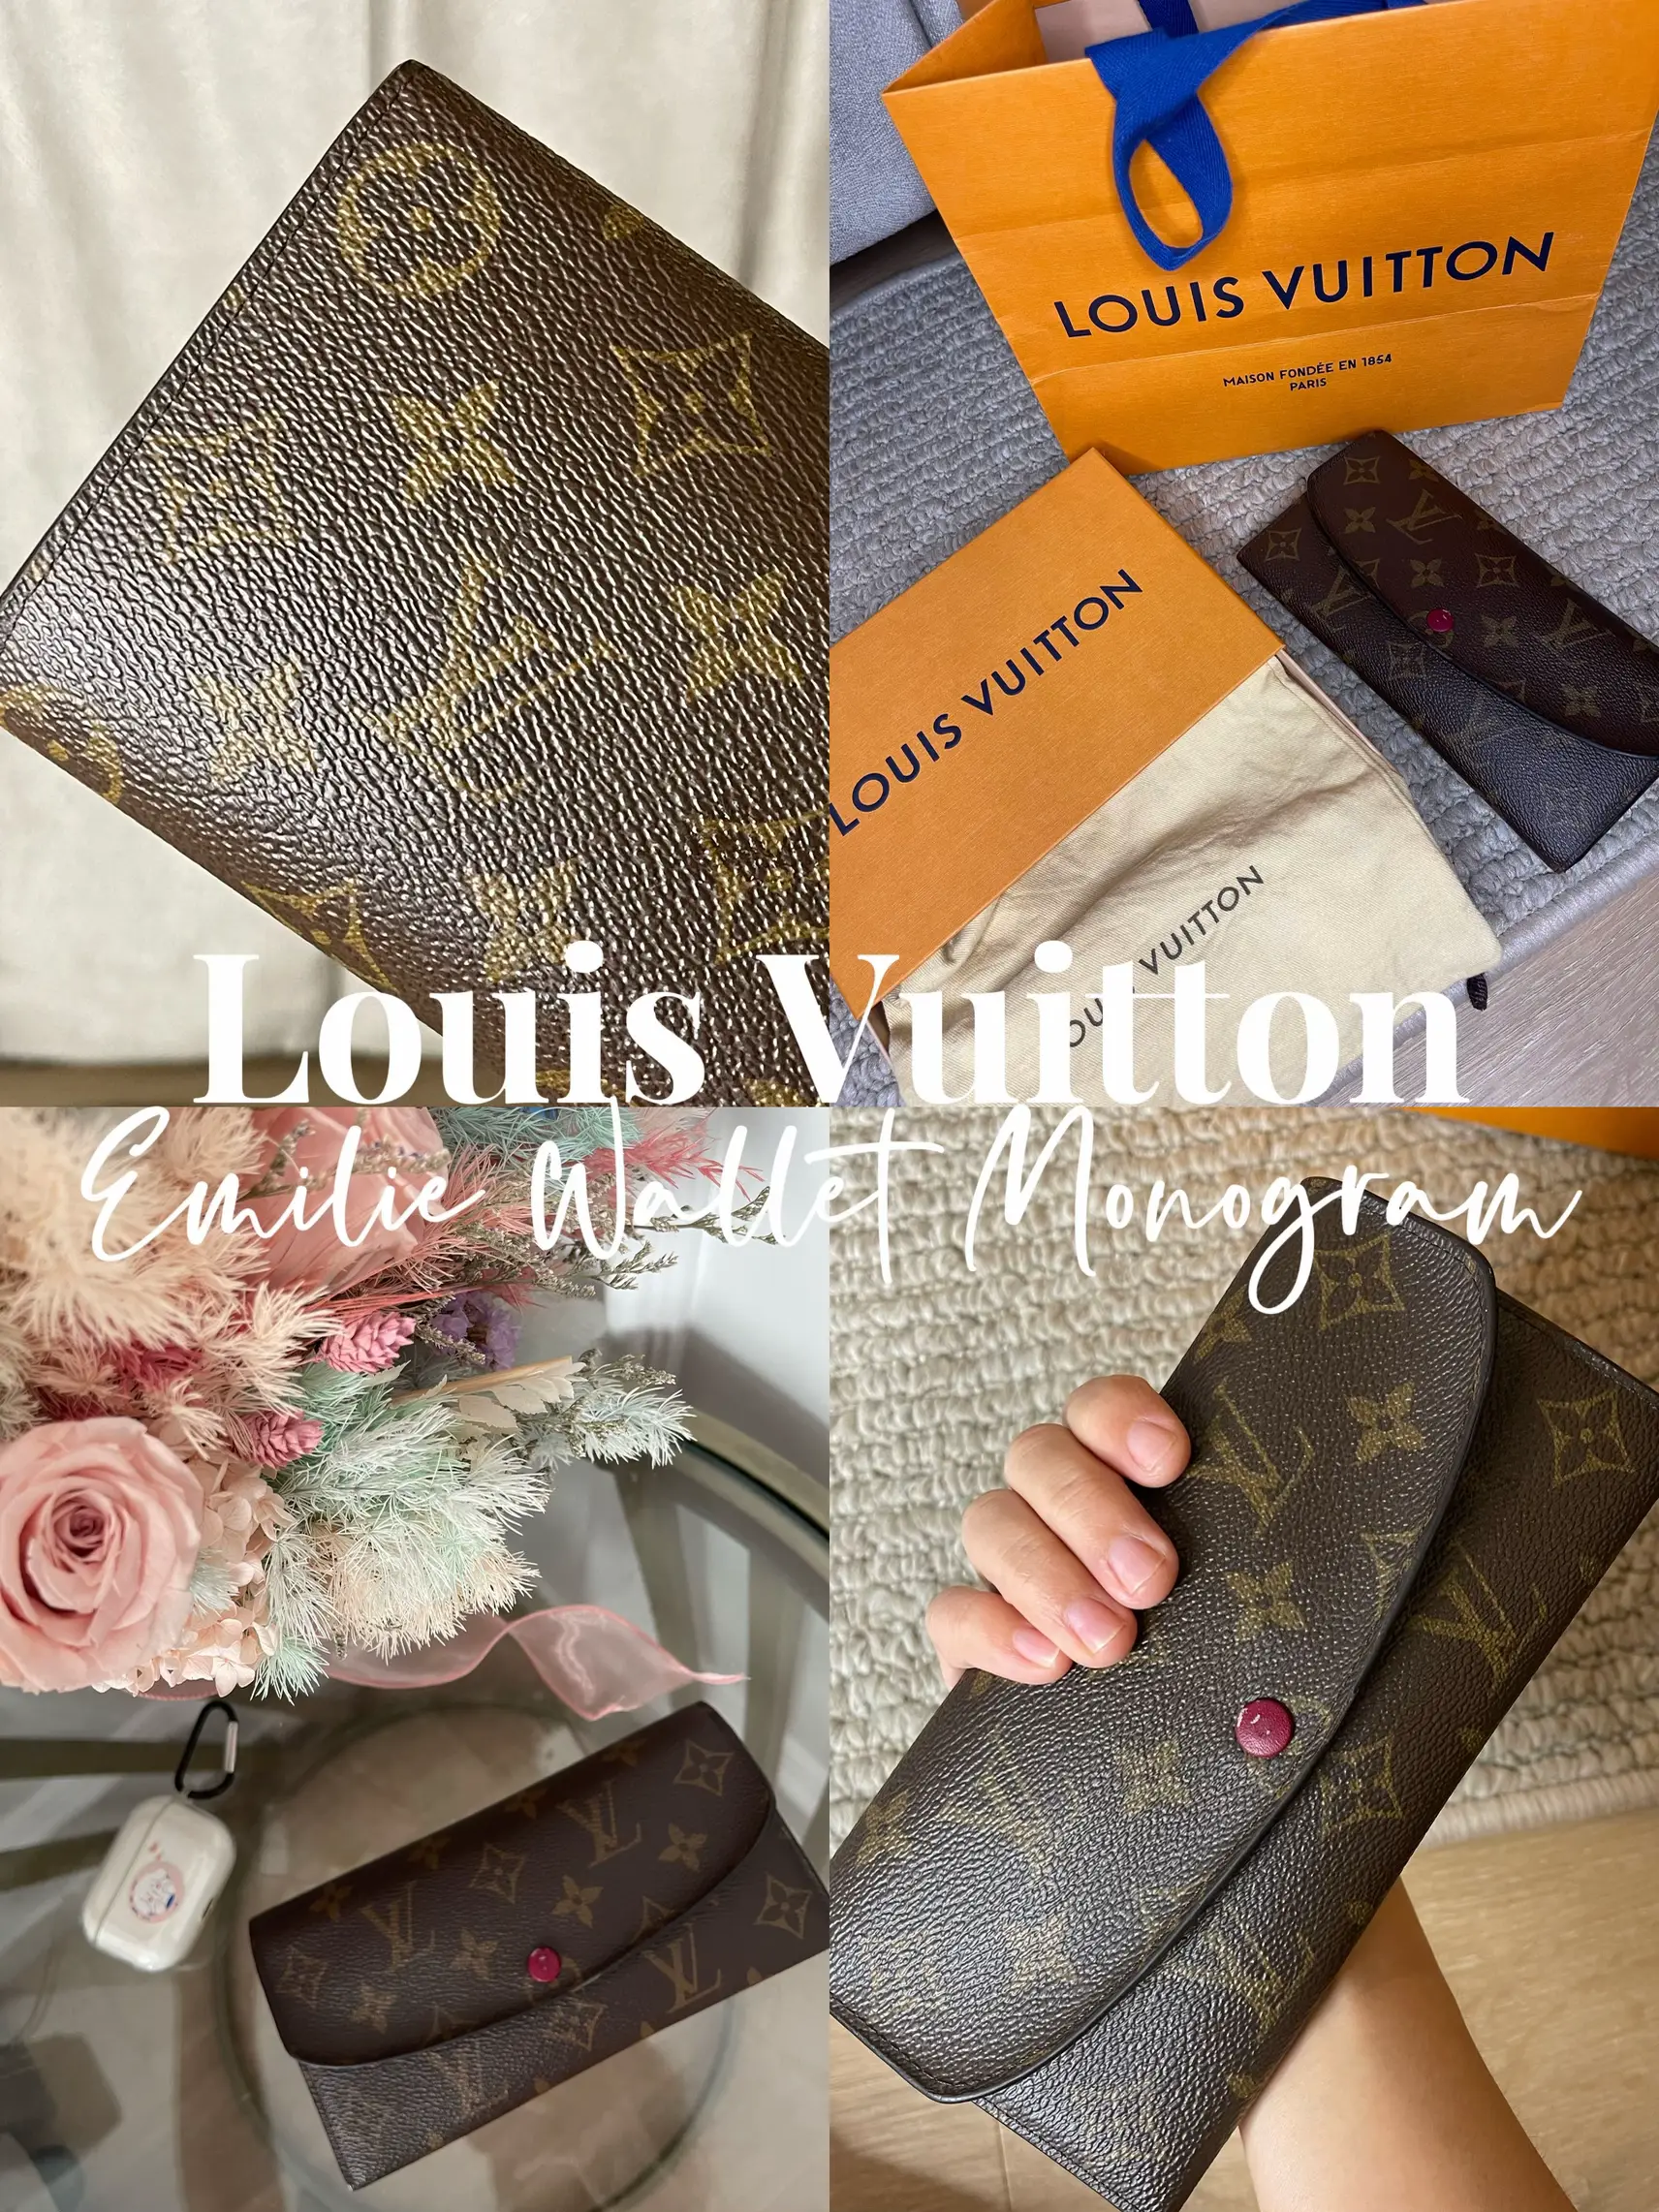 Luxury bags make u feels the luxurious✨, Gallery posted by 𝙘𝙞𝙣𝙣𝙘𝙮